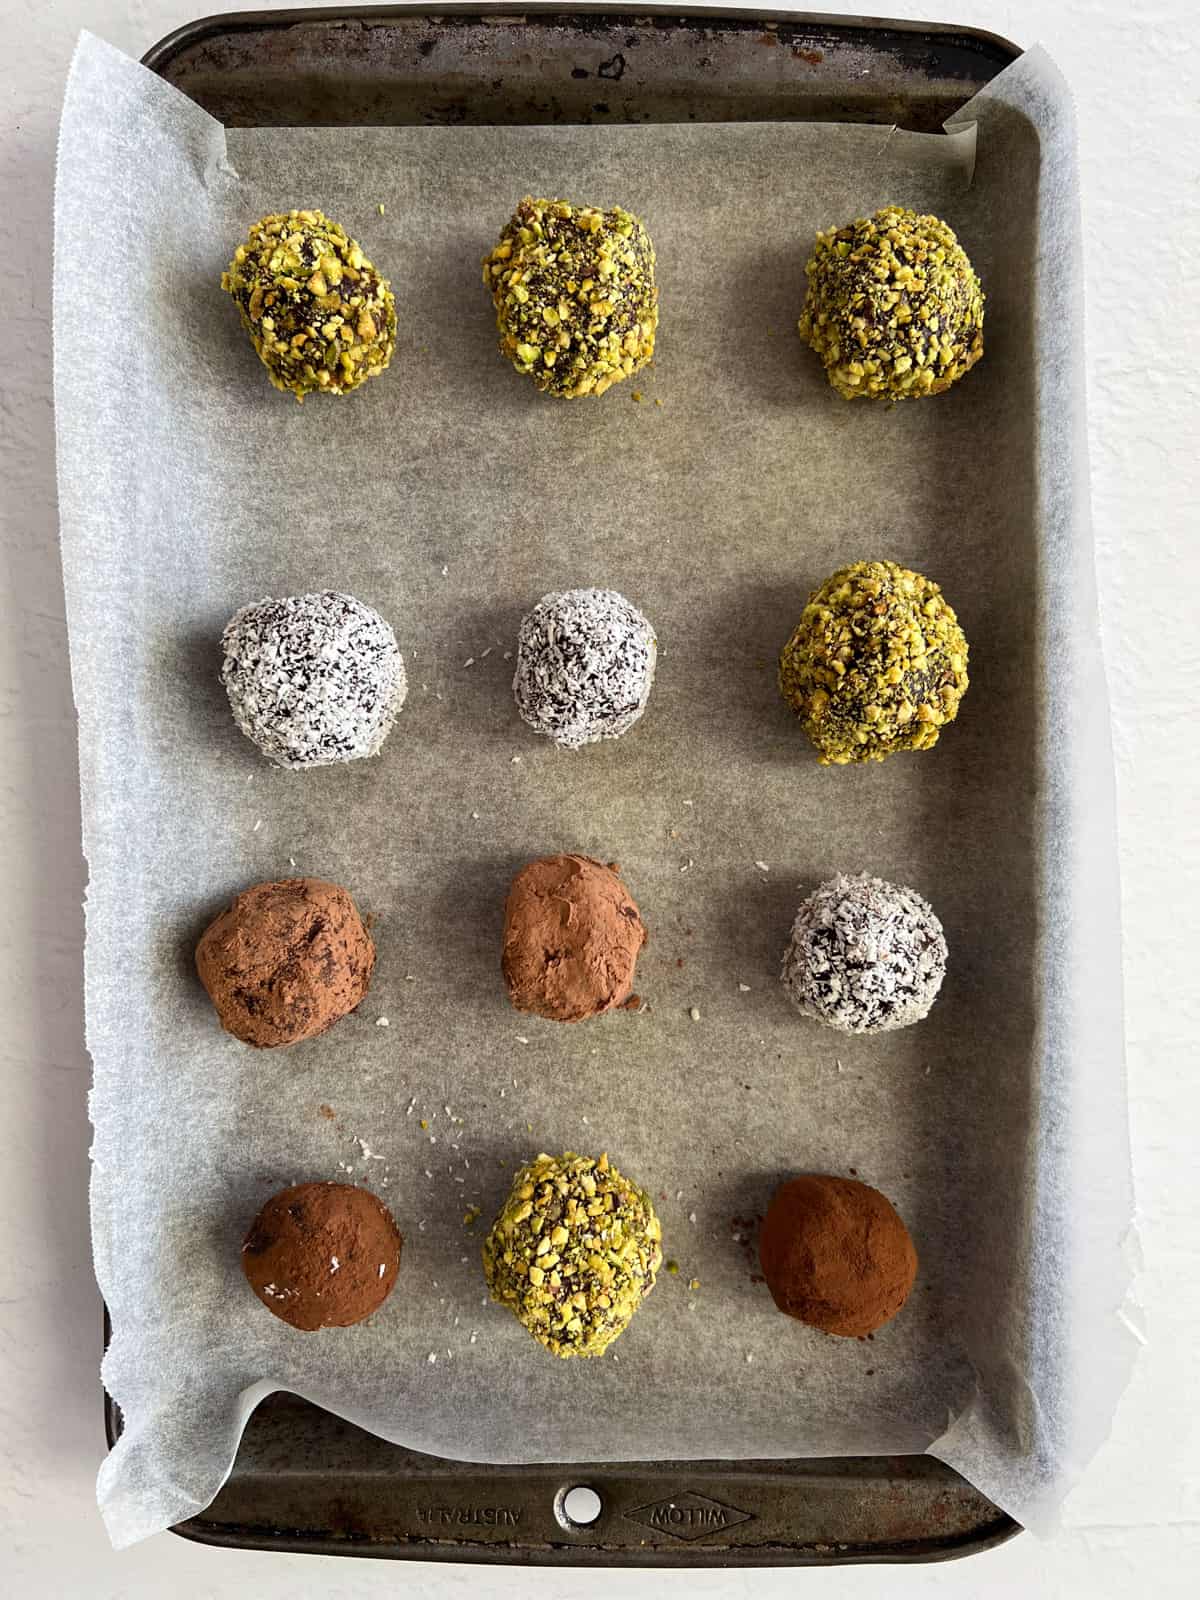 brown balls coated in either crushed pisatchio, desiccated coconut or cacao powder in a tray